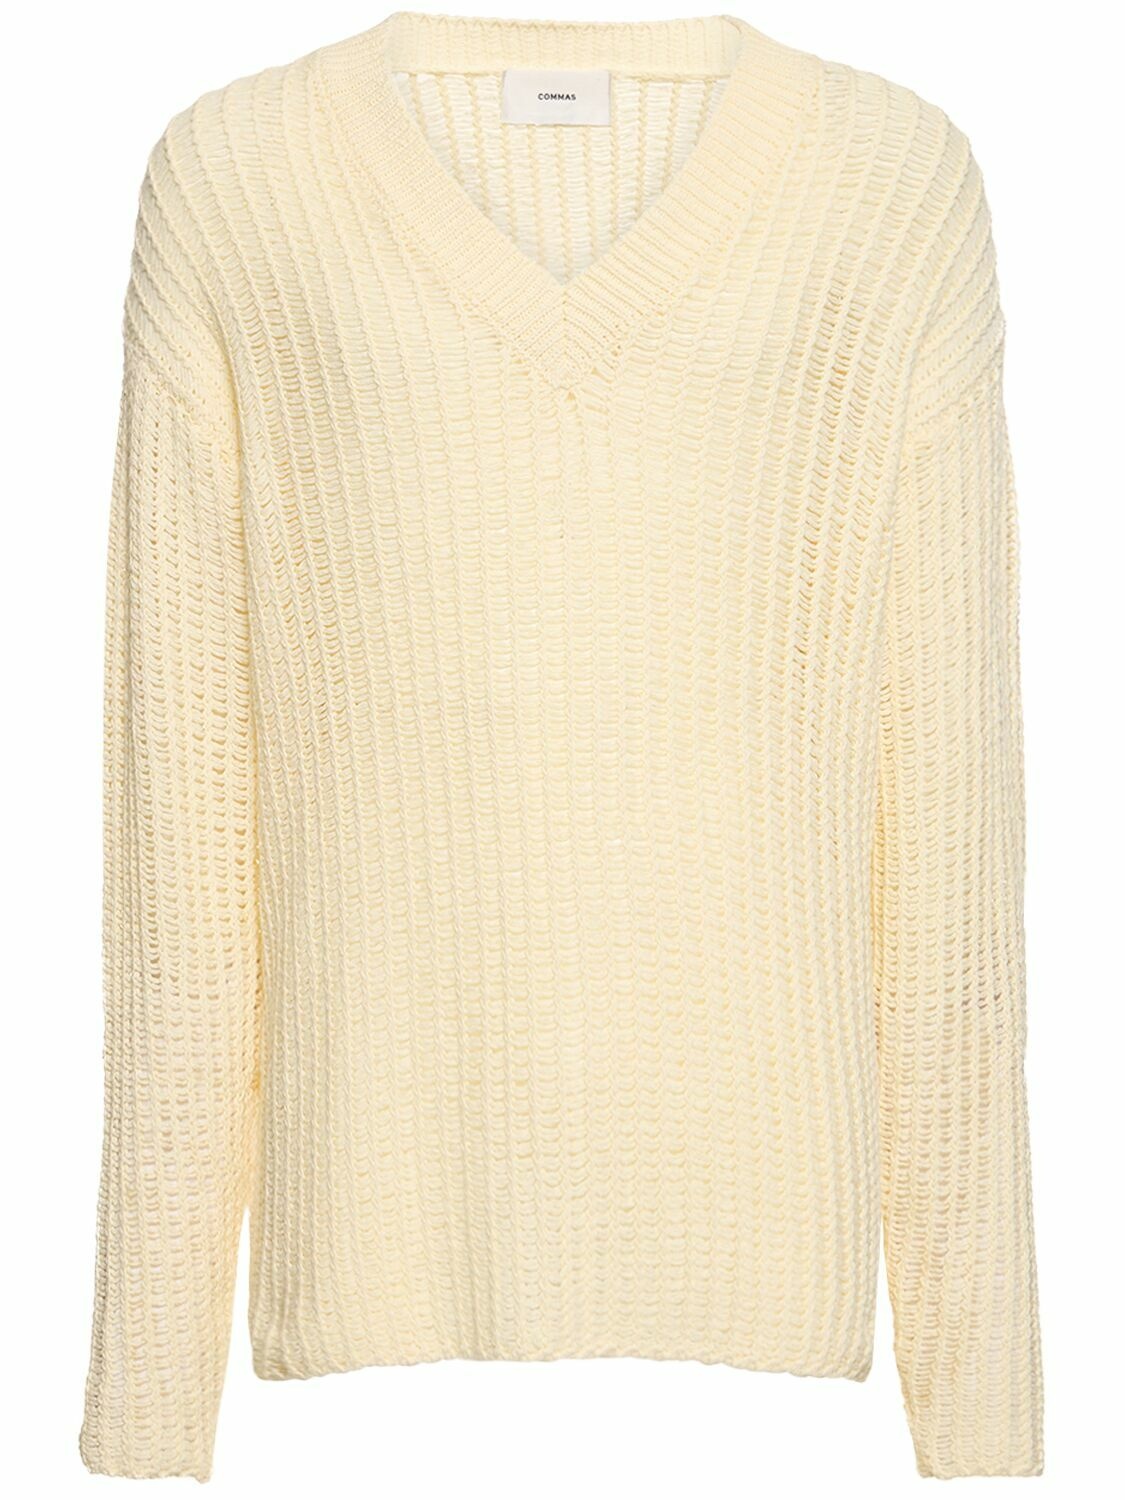 Photo: COMMAS - Relaxed Fit V-neck Knit Sweater